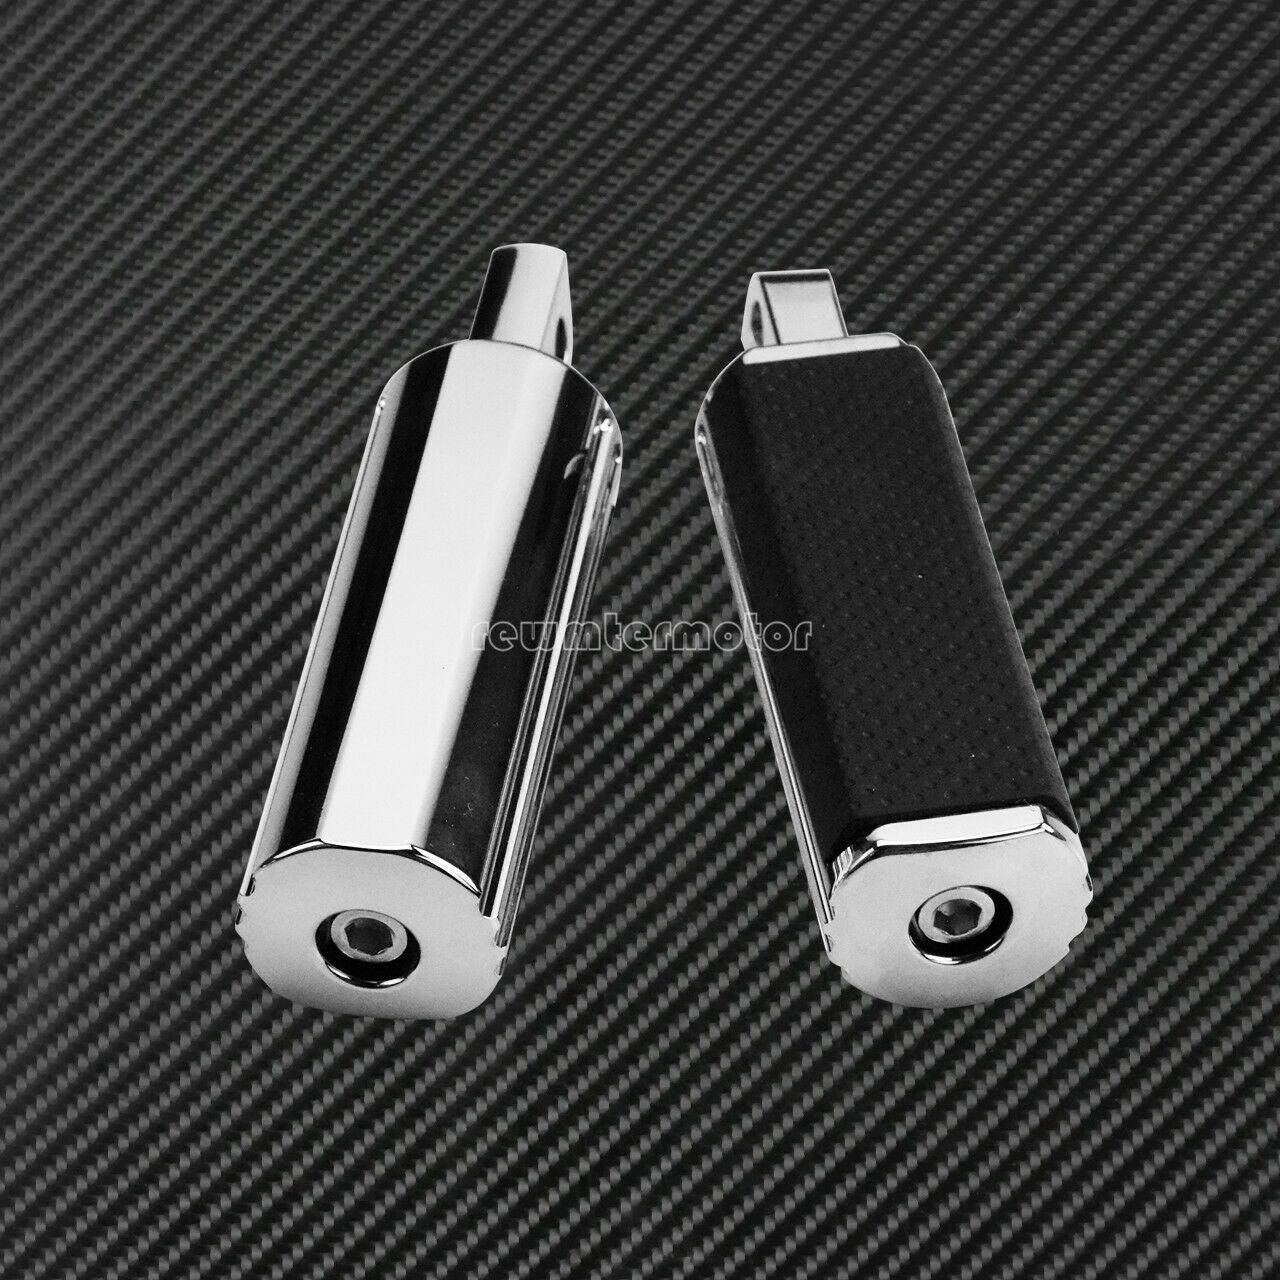 Chrome Defiance Foot Peg Male Footrests Fit For Harley Electra Glide Low Glide - Moto Life Products